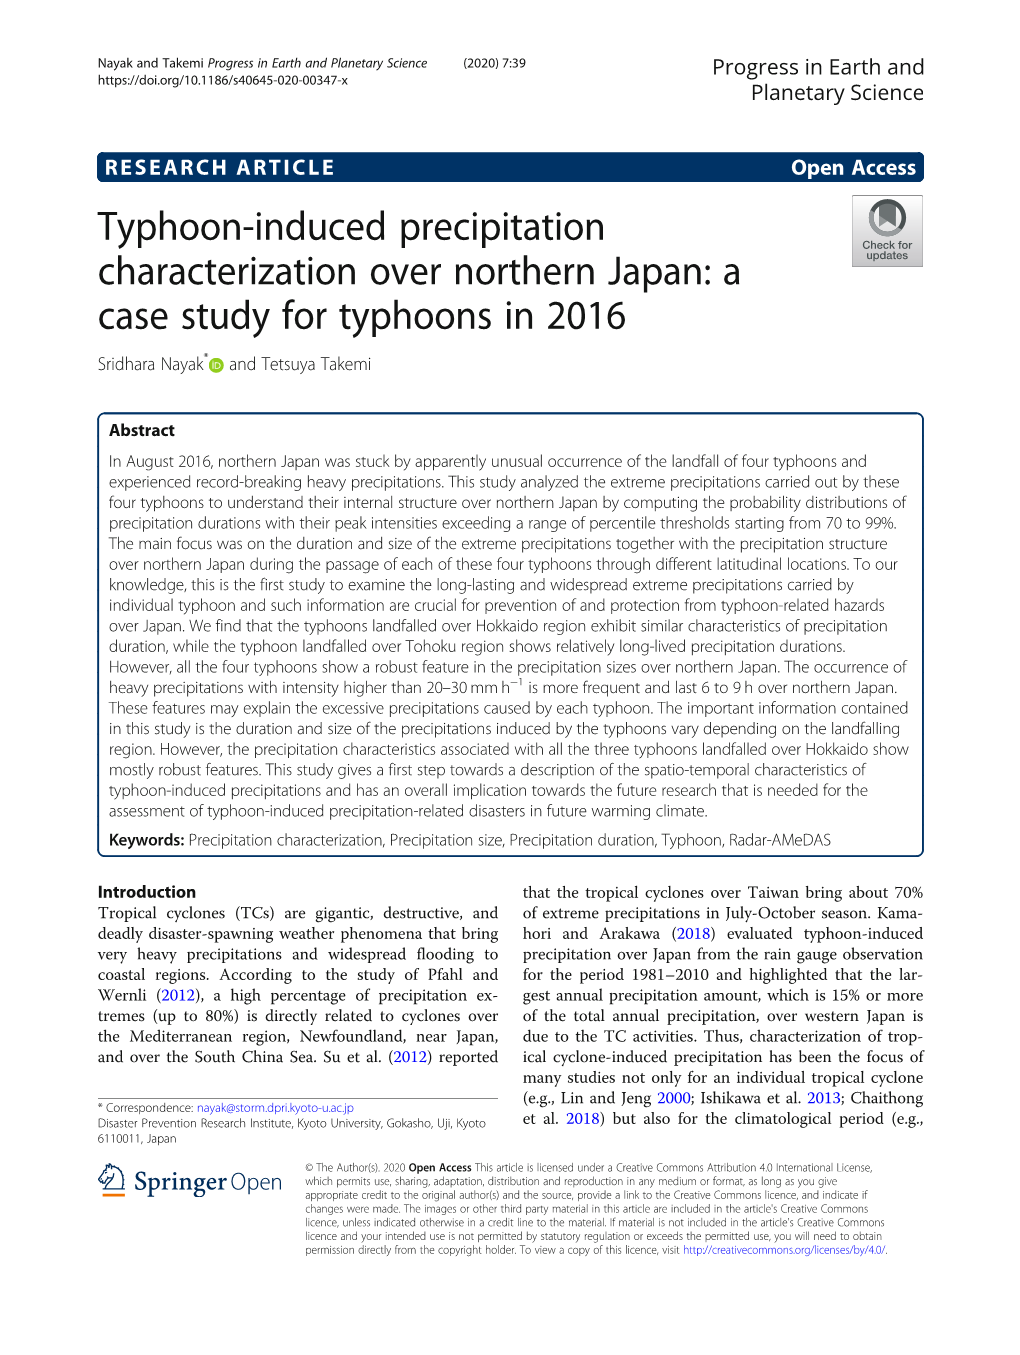 Typhoon-Induced Precipitation Characterization Over Northern Japan: a Case Study for Typhoons in 2016 Sridhara Nayak* and Tetsuya Takemi